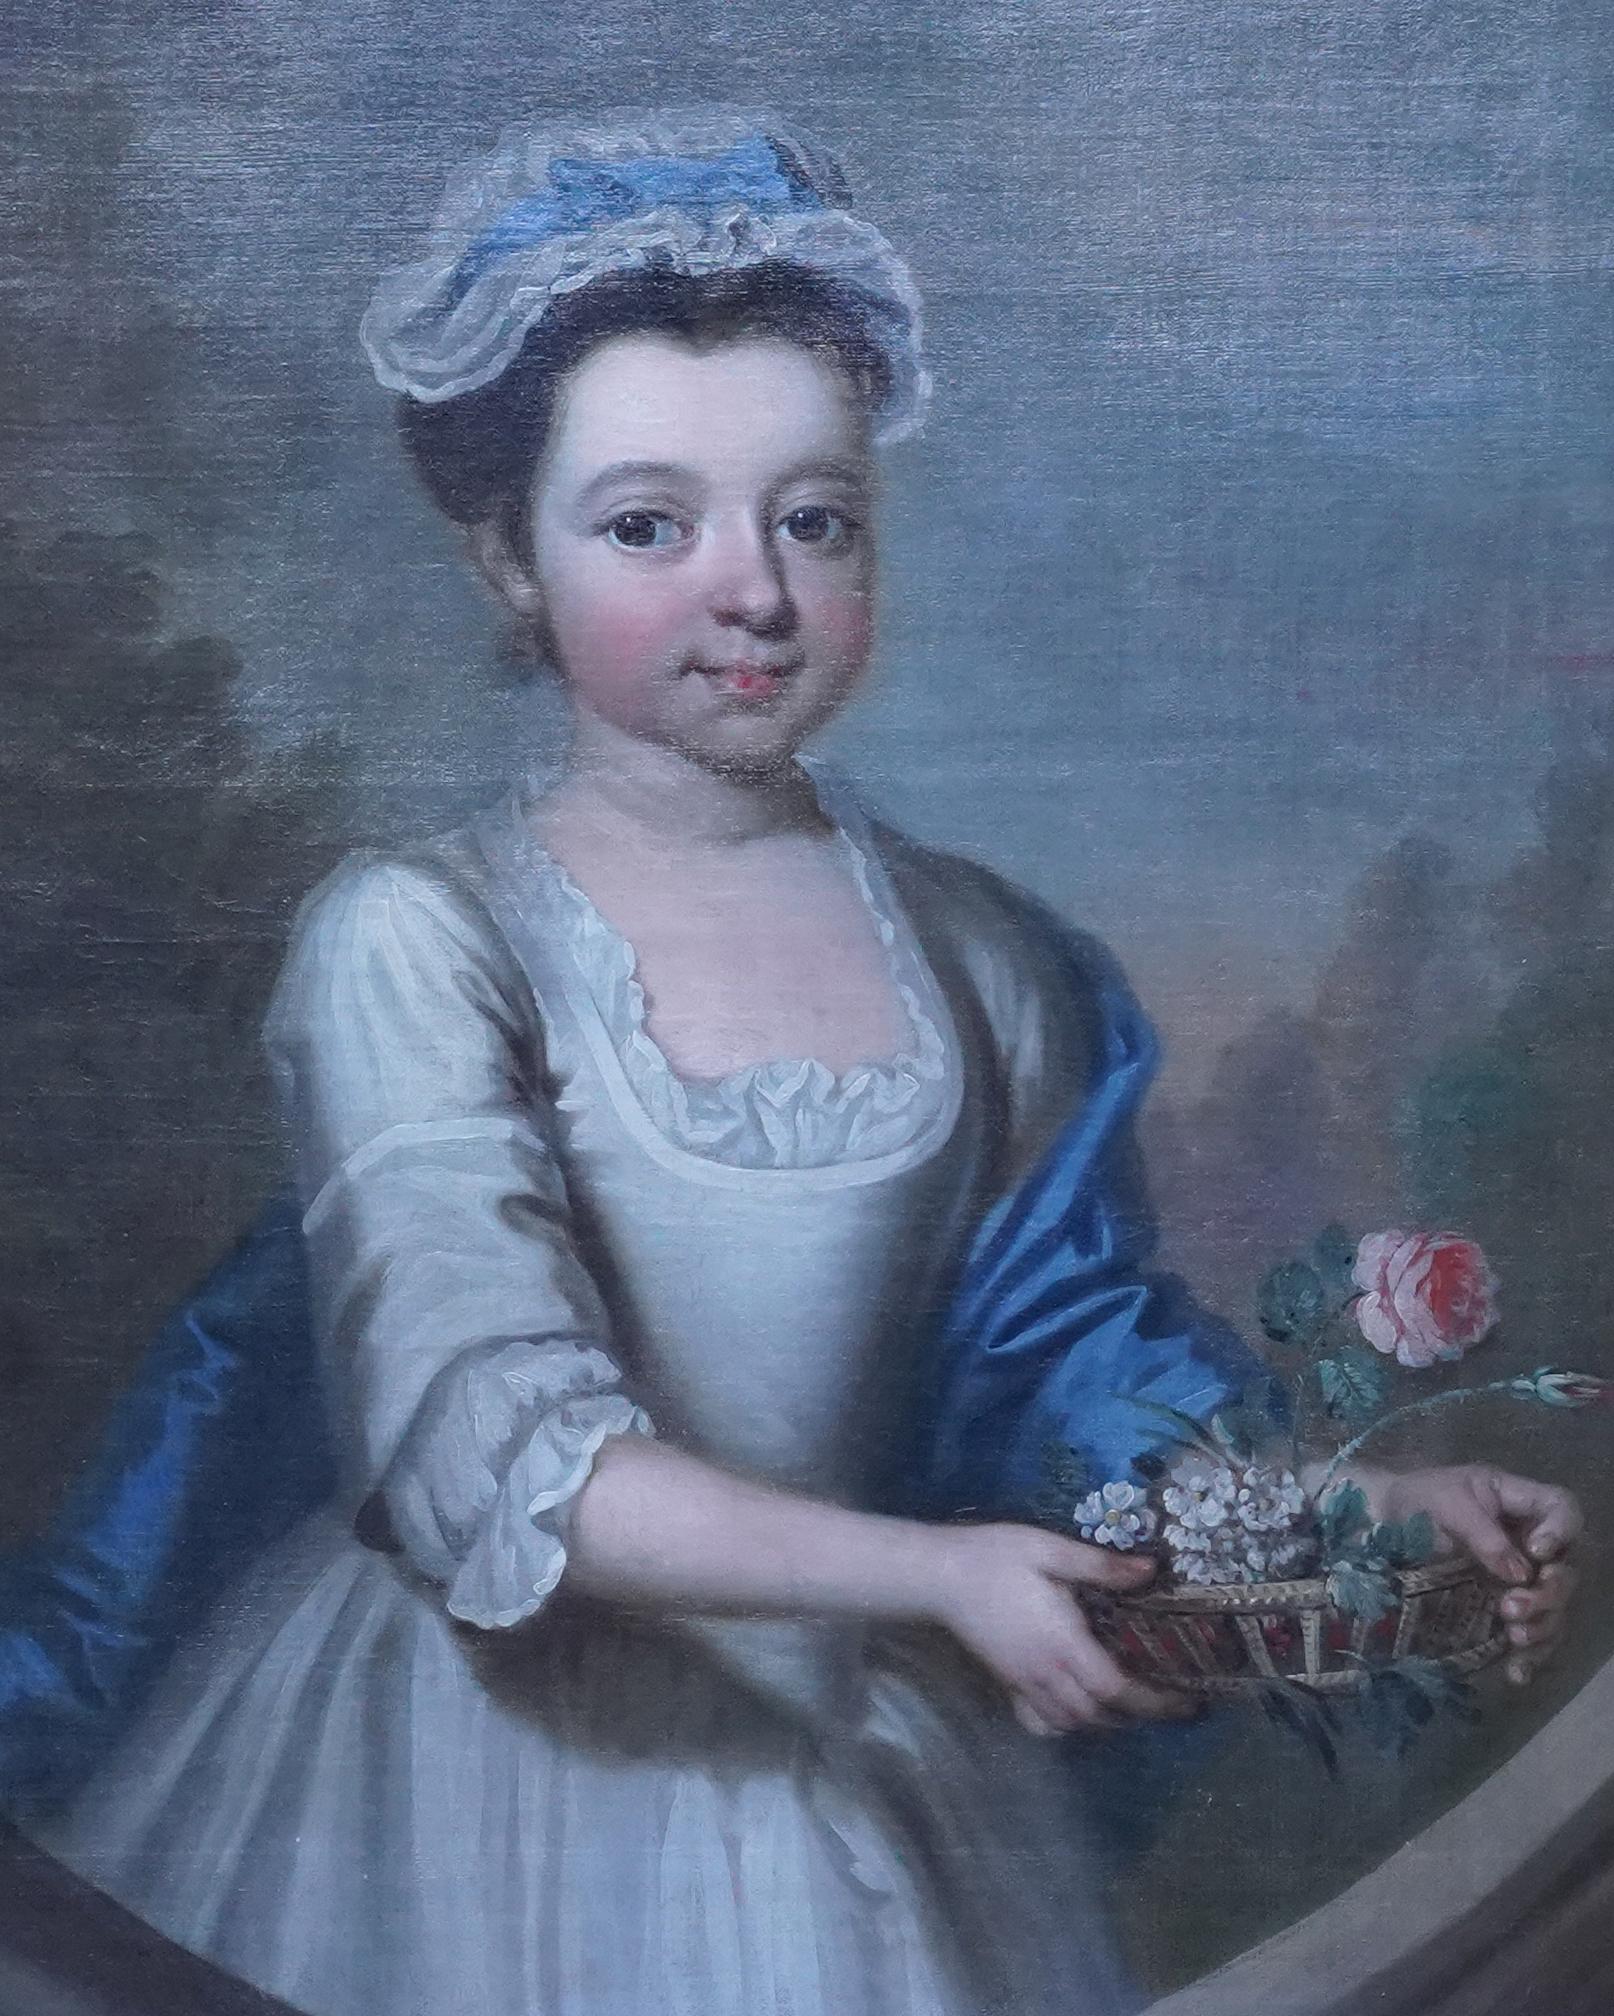 This charming 18th century Old Master cartouche portrait oil painting is attributed to the circle of Philip Mercier. Painted circa 1740 the composition is a three quarter length portrait of a young girl holding a wicker basket of flowers. She is